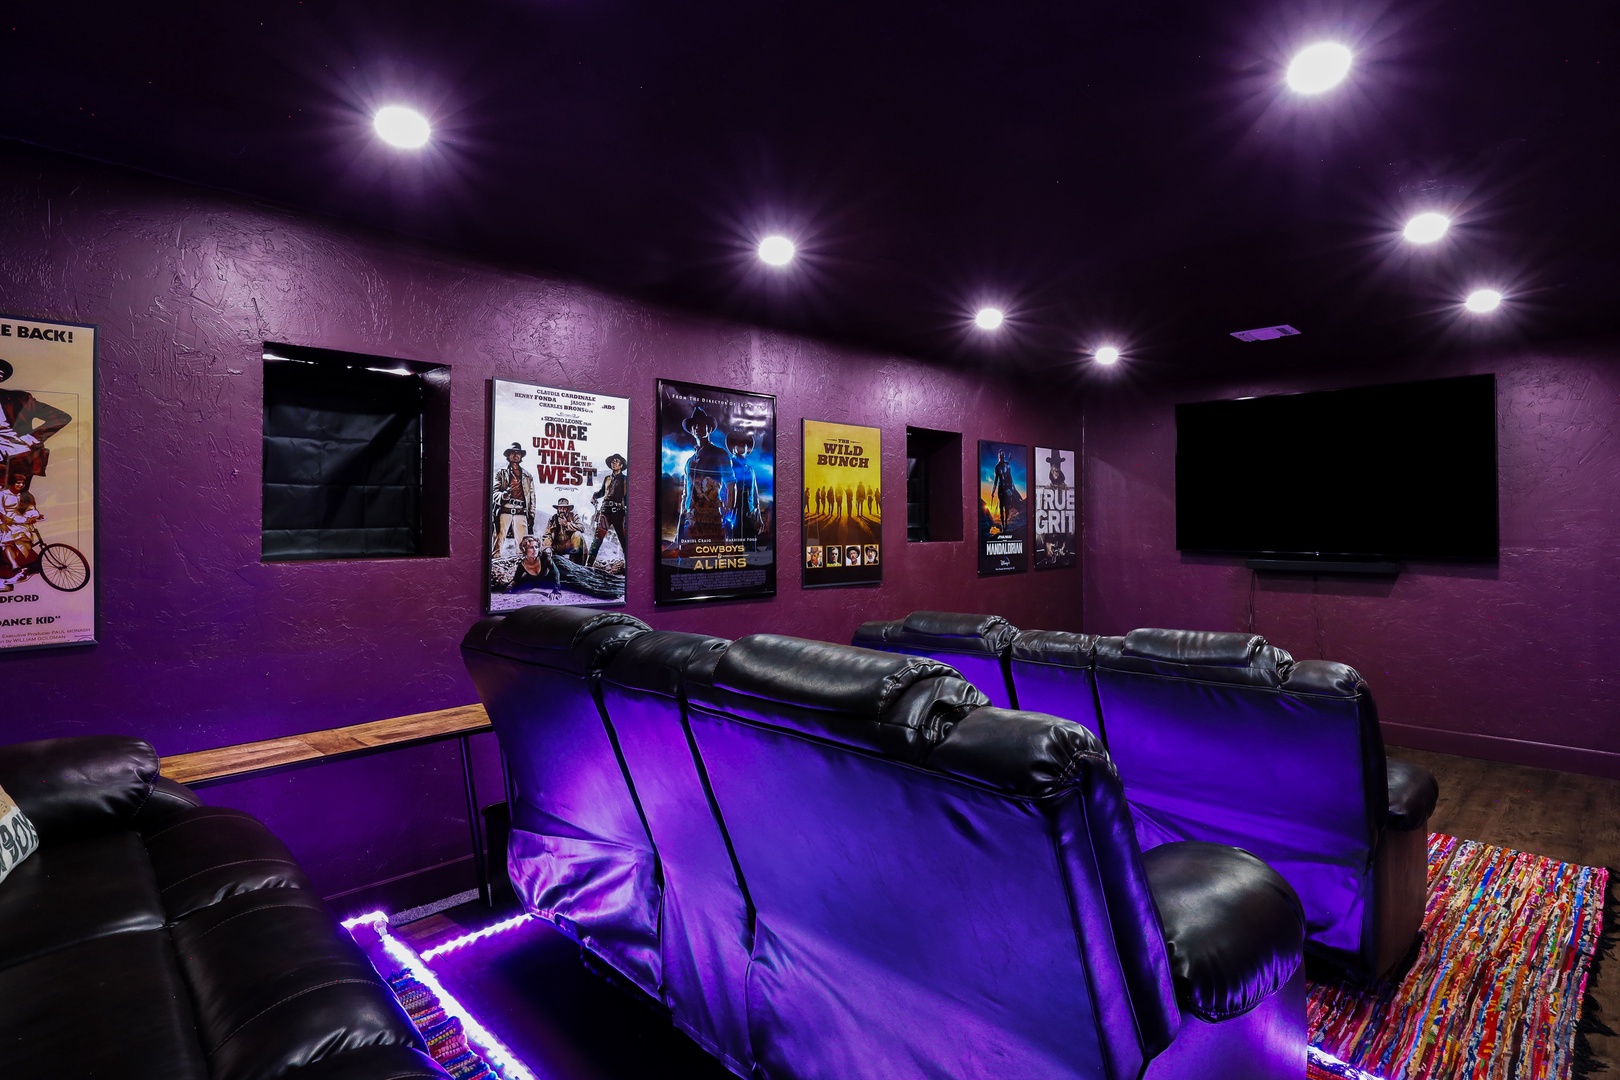 Head into the private theater & enjoy a movie night at home!